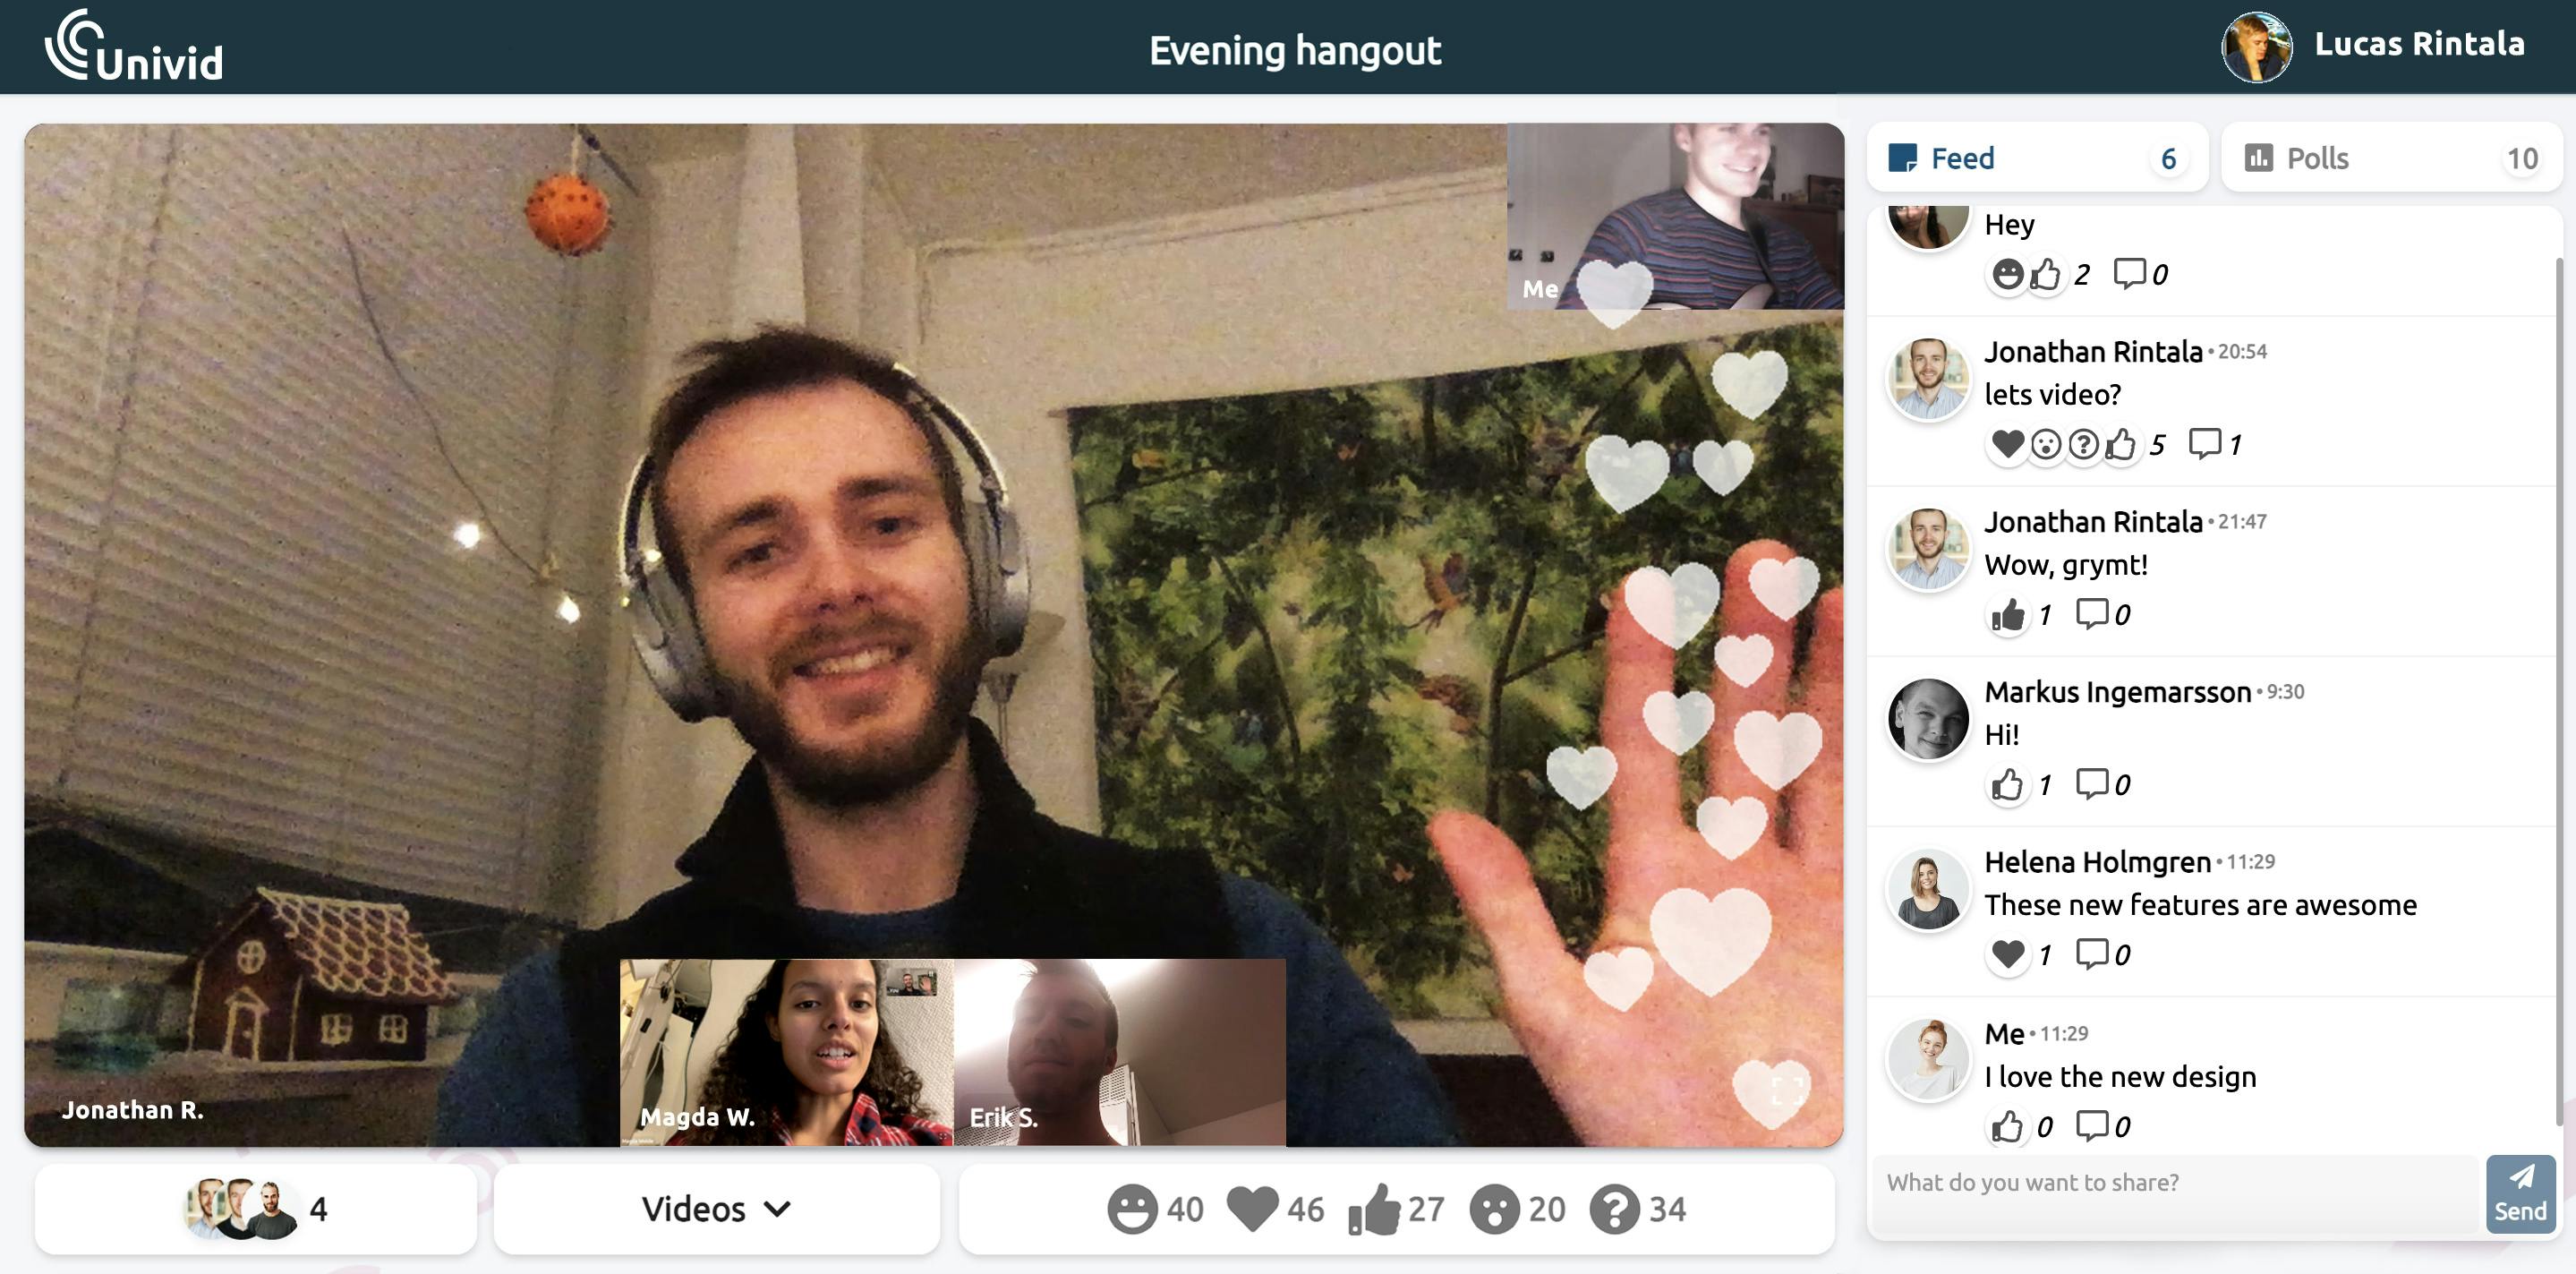 You can now host your every day video conferencing calls on Univid. The latest feature makes video calls on the platform possible, with up to 300 participants.